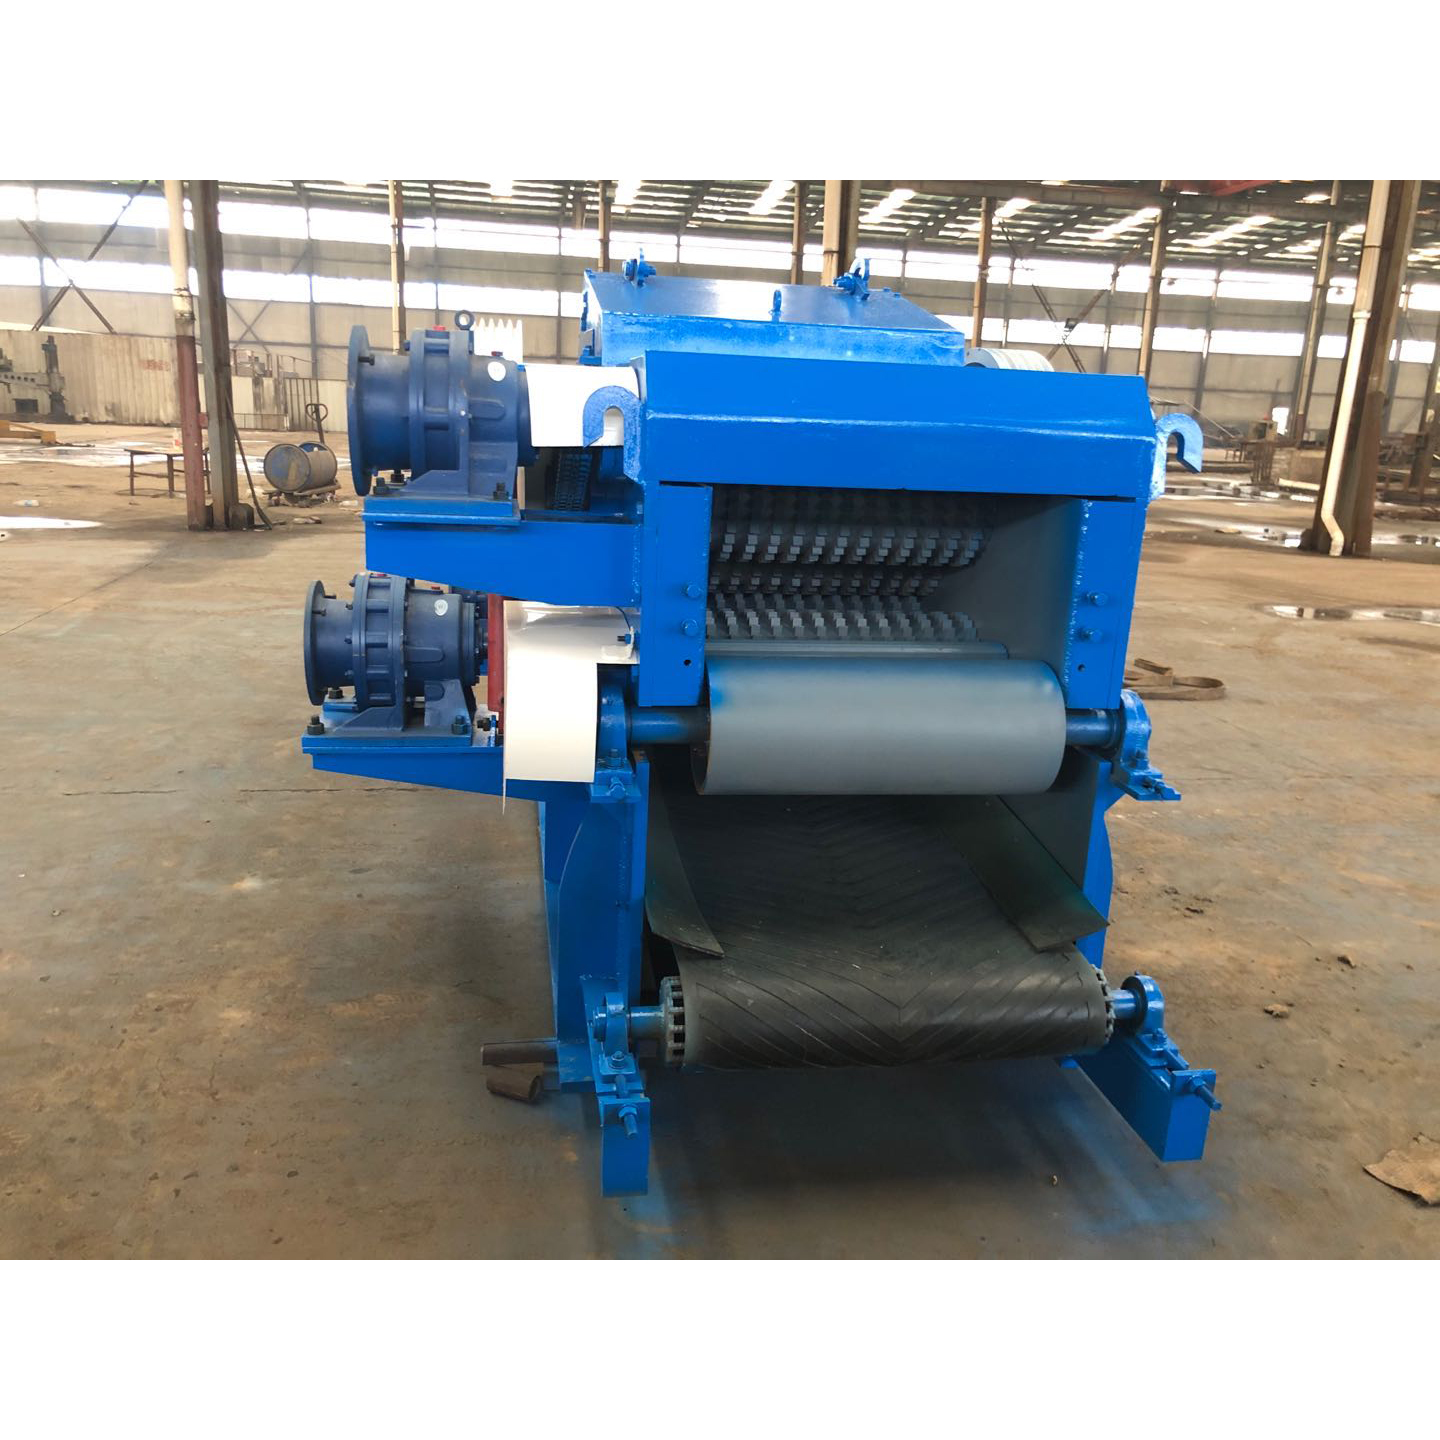 Wood Chipper For Sale Wood Crusher For waste wood logs